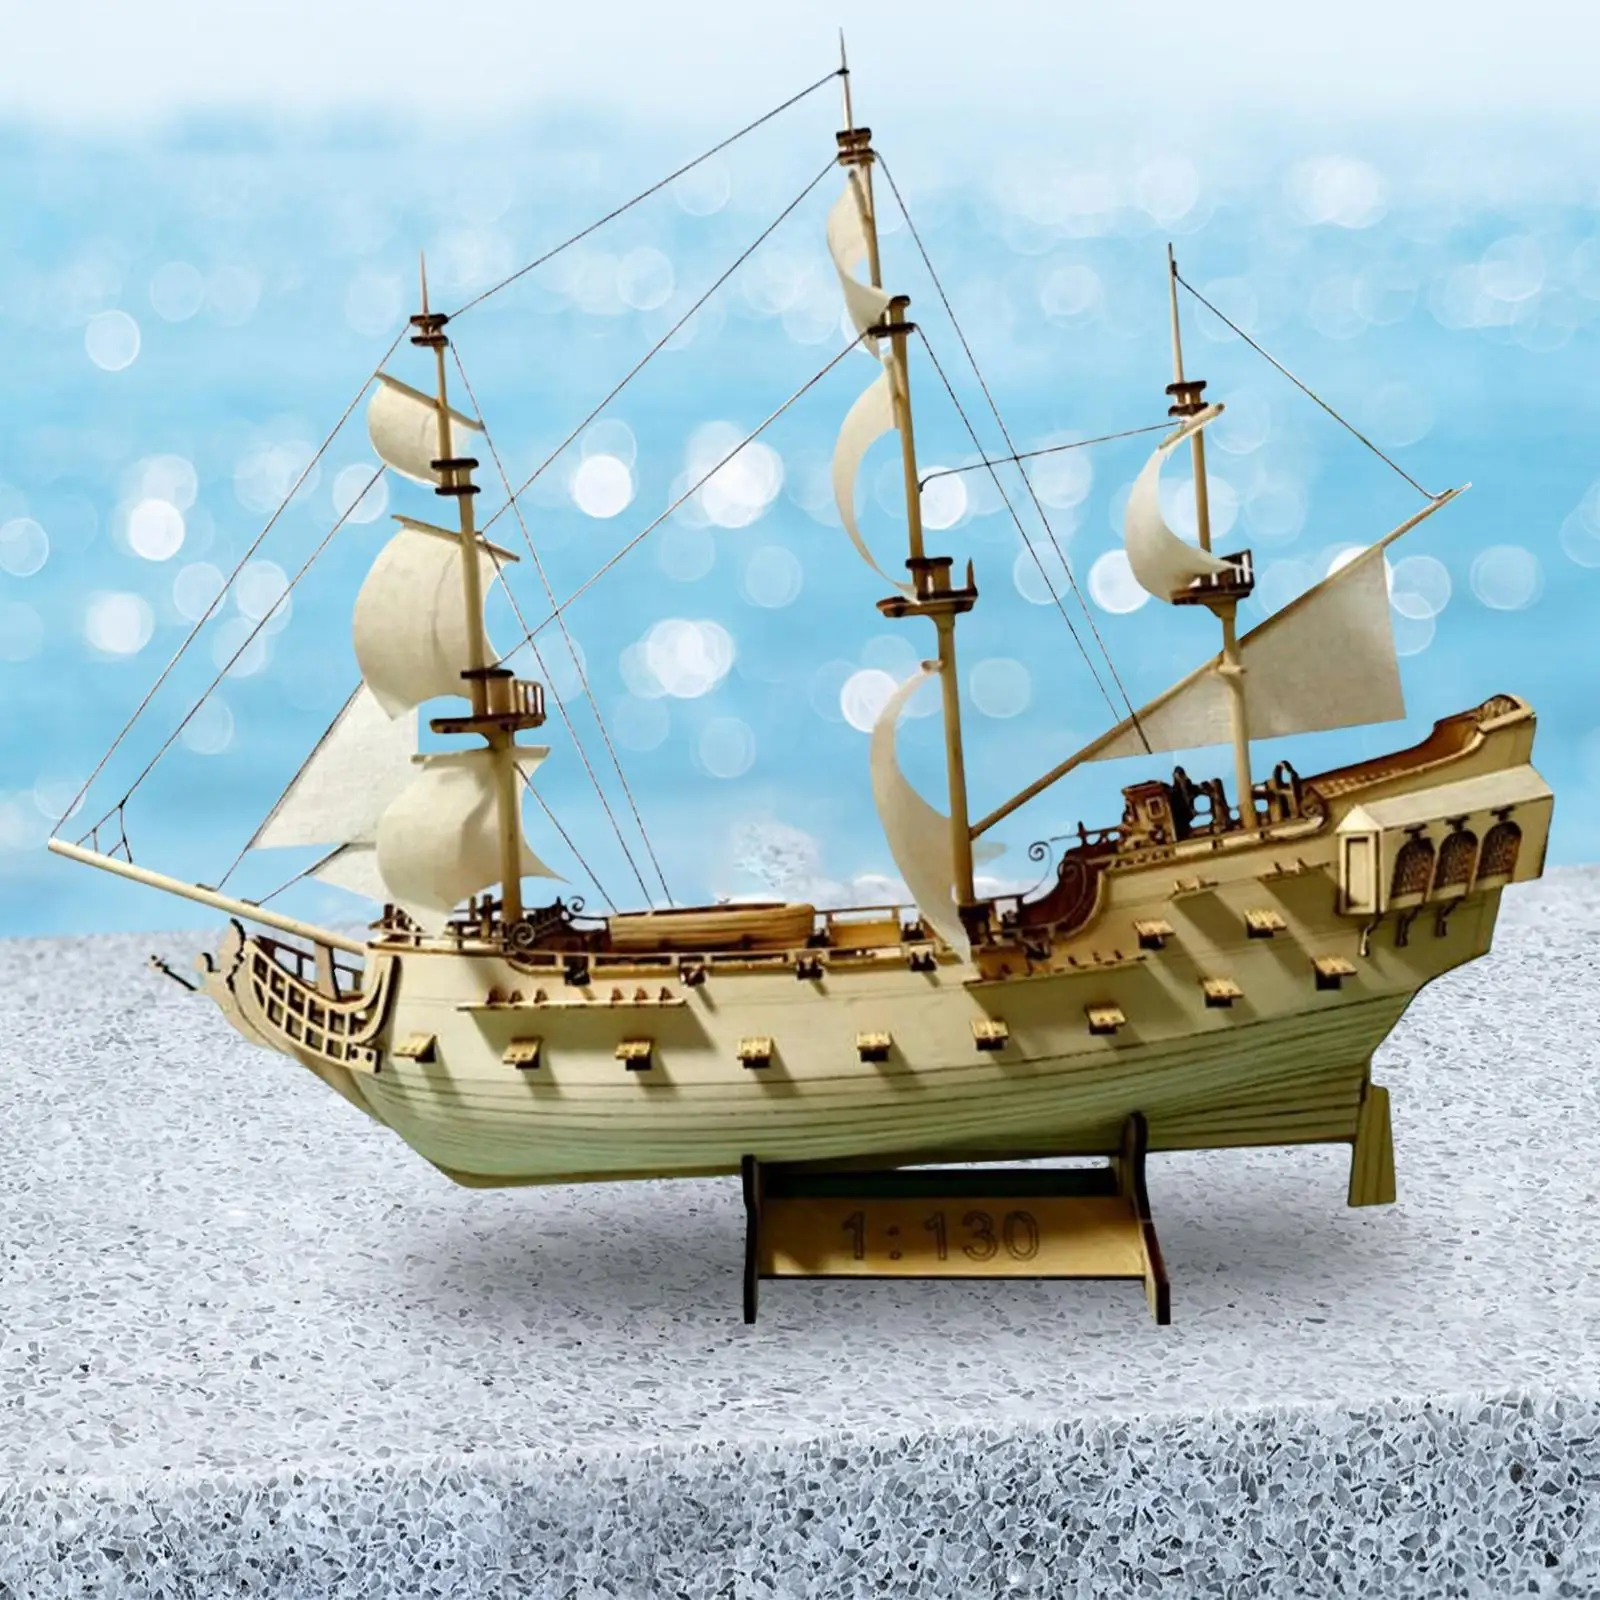 1:300 Scale Wooden Sailing Boat Kits Vessel  3D Puzzles Unfinished Sailboat for Collectibles  Birthday Gift Desk Decor